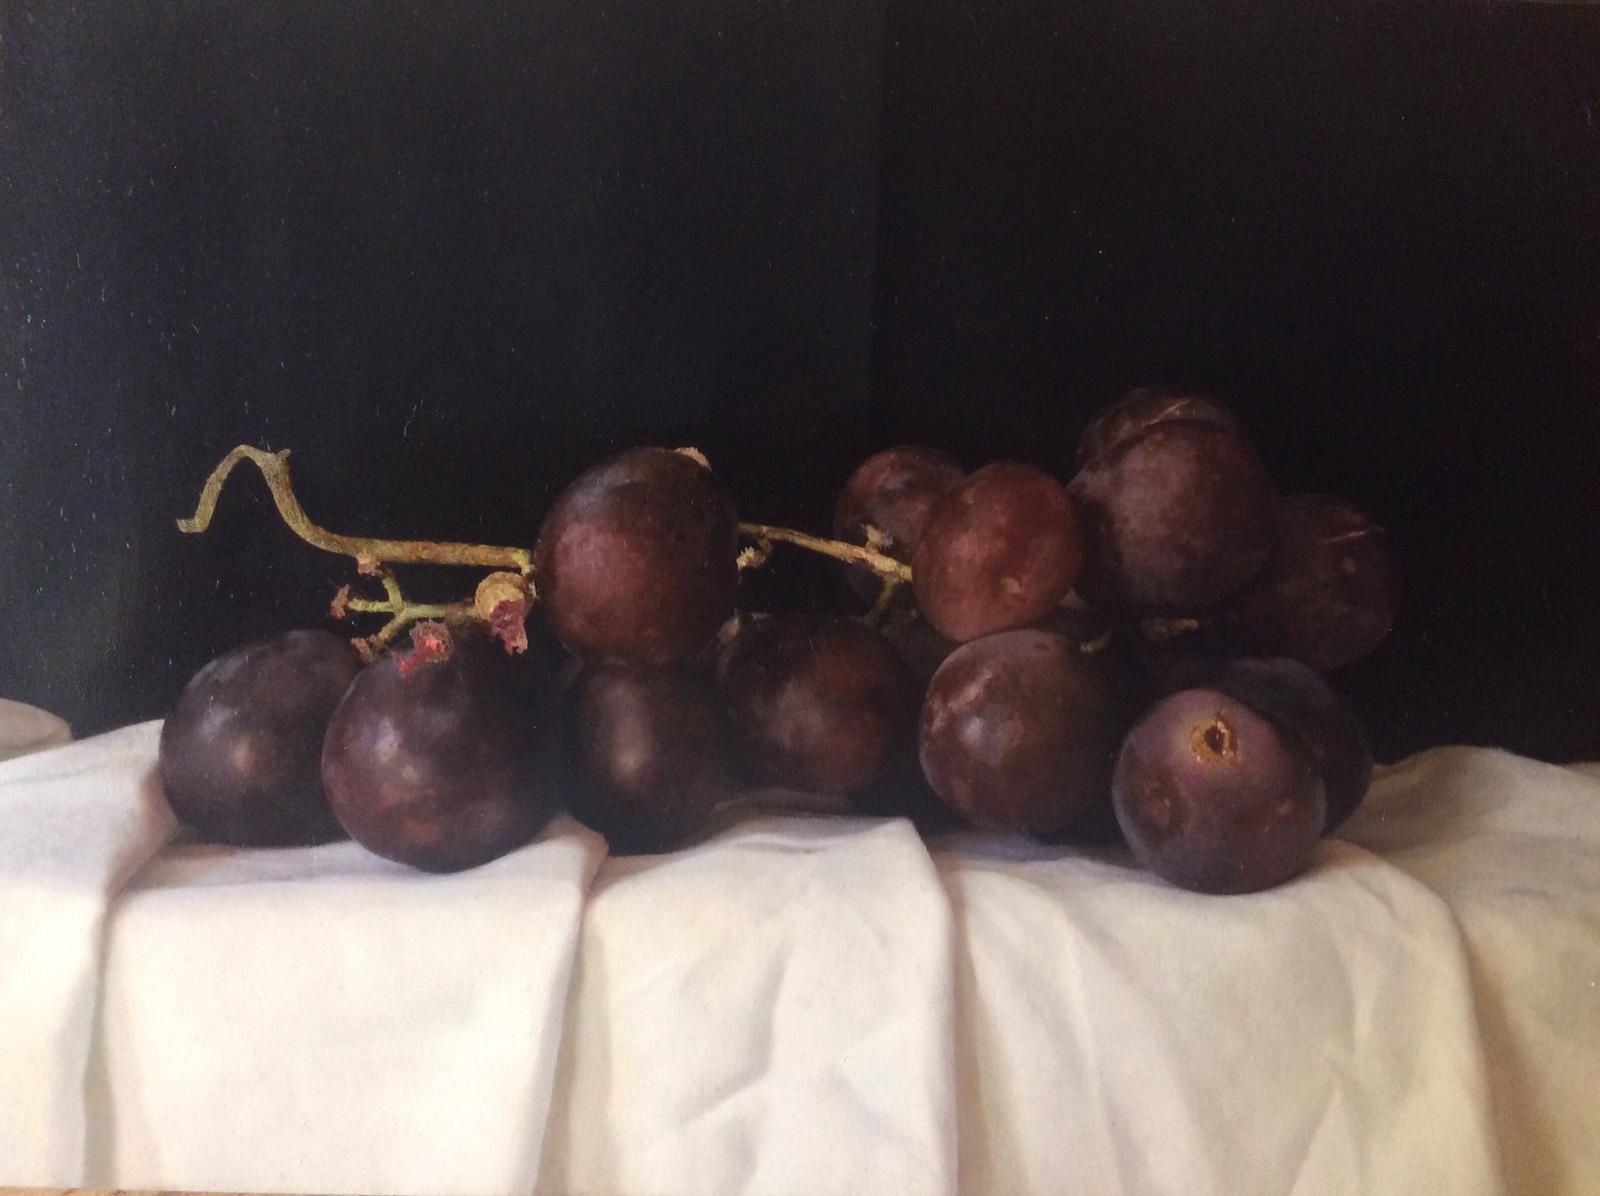 Large Grapes by Kate Verrion